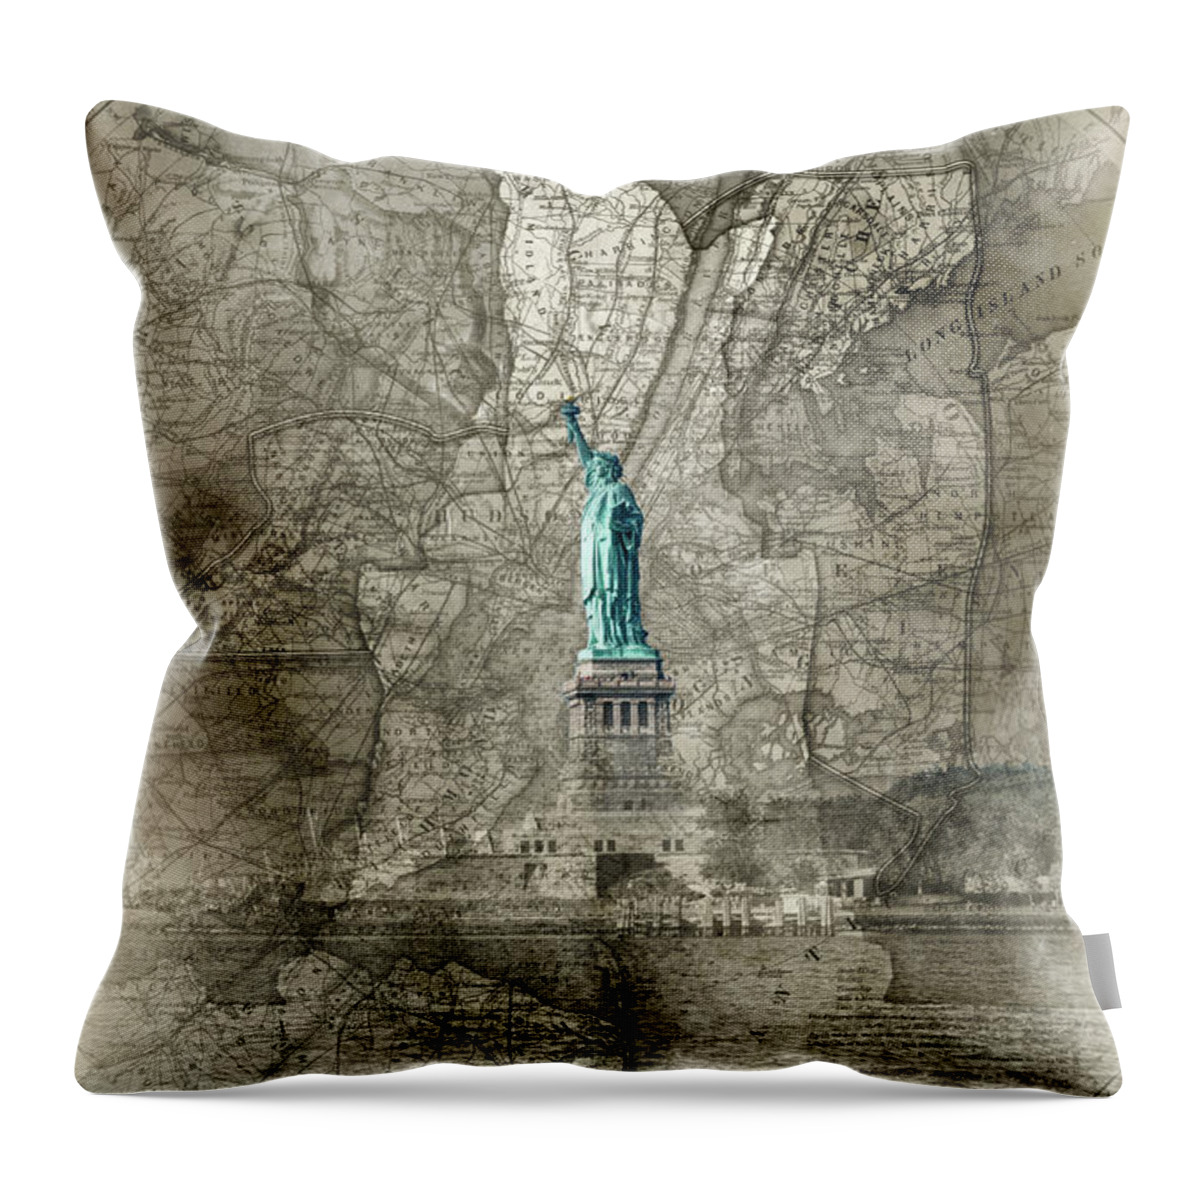 Liberty Map Sepia Throw Pillow featuring the photograph Liberty Map Sepia by Sharon Popek